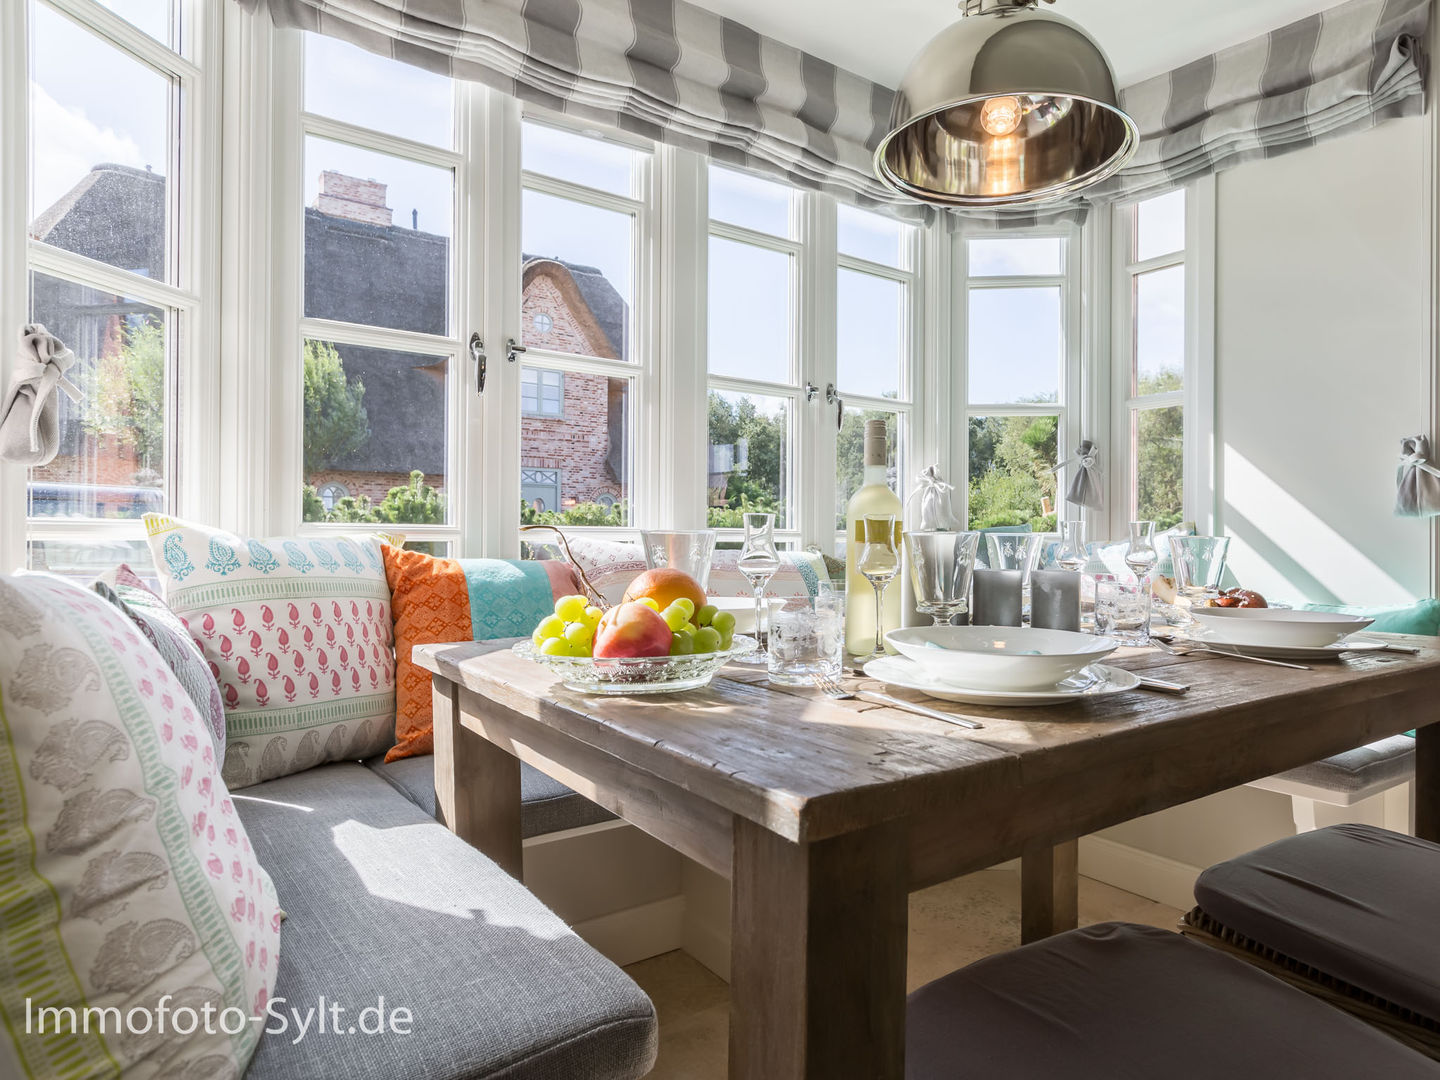 Ferienhaus in List, Immofoto-Sylt Immofoto-Sylt Country style dining room